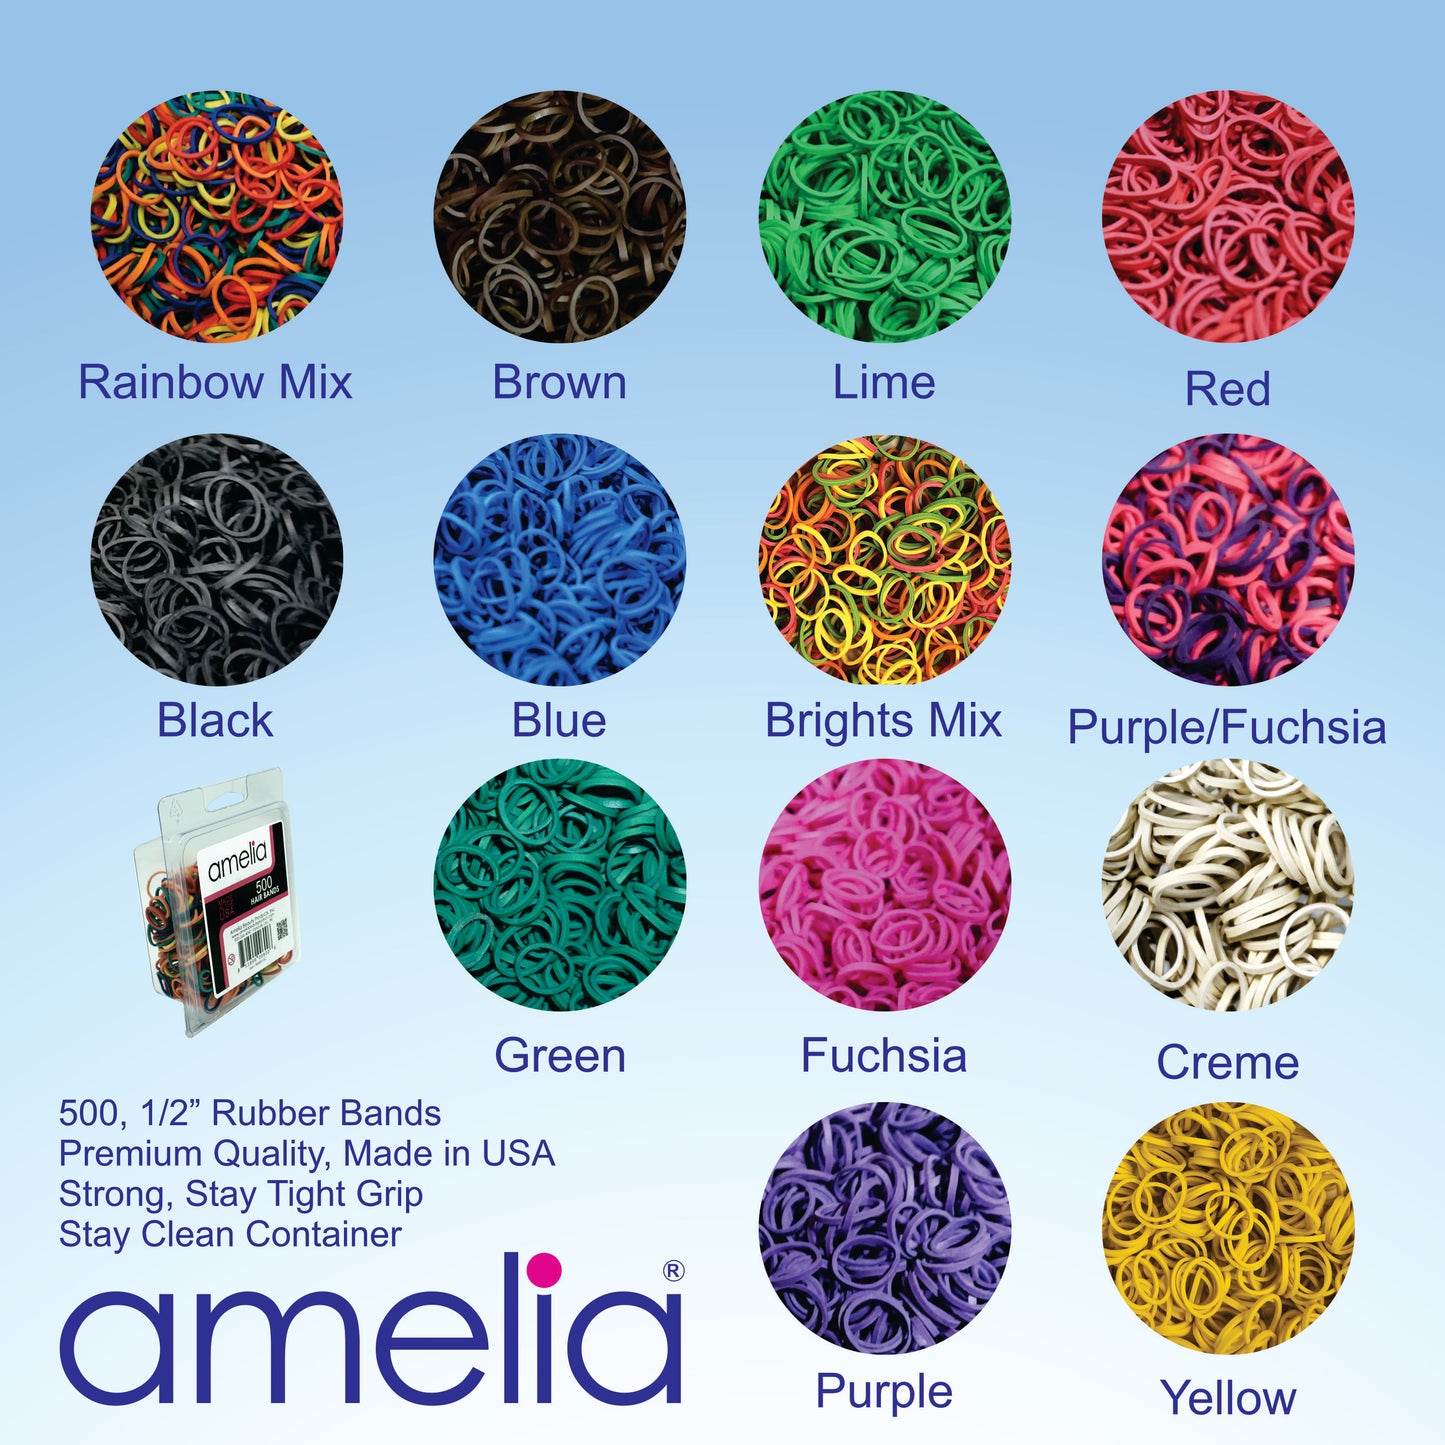 Amelia Beauty | 1/2in, Purple, Elastic Rubber Band Pony Tail Holders | Made in USA, Ideal for Ponytails, Braids, Twists, Dreadlocks, Styling Accessories for Women, Men and Girls | 500 Pack